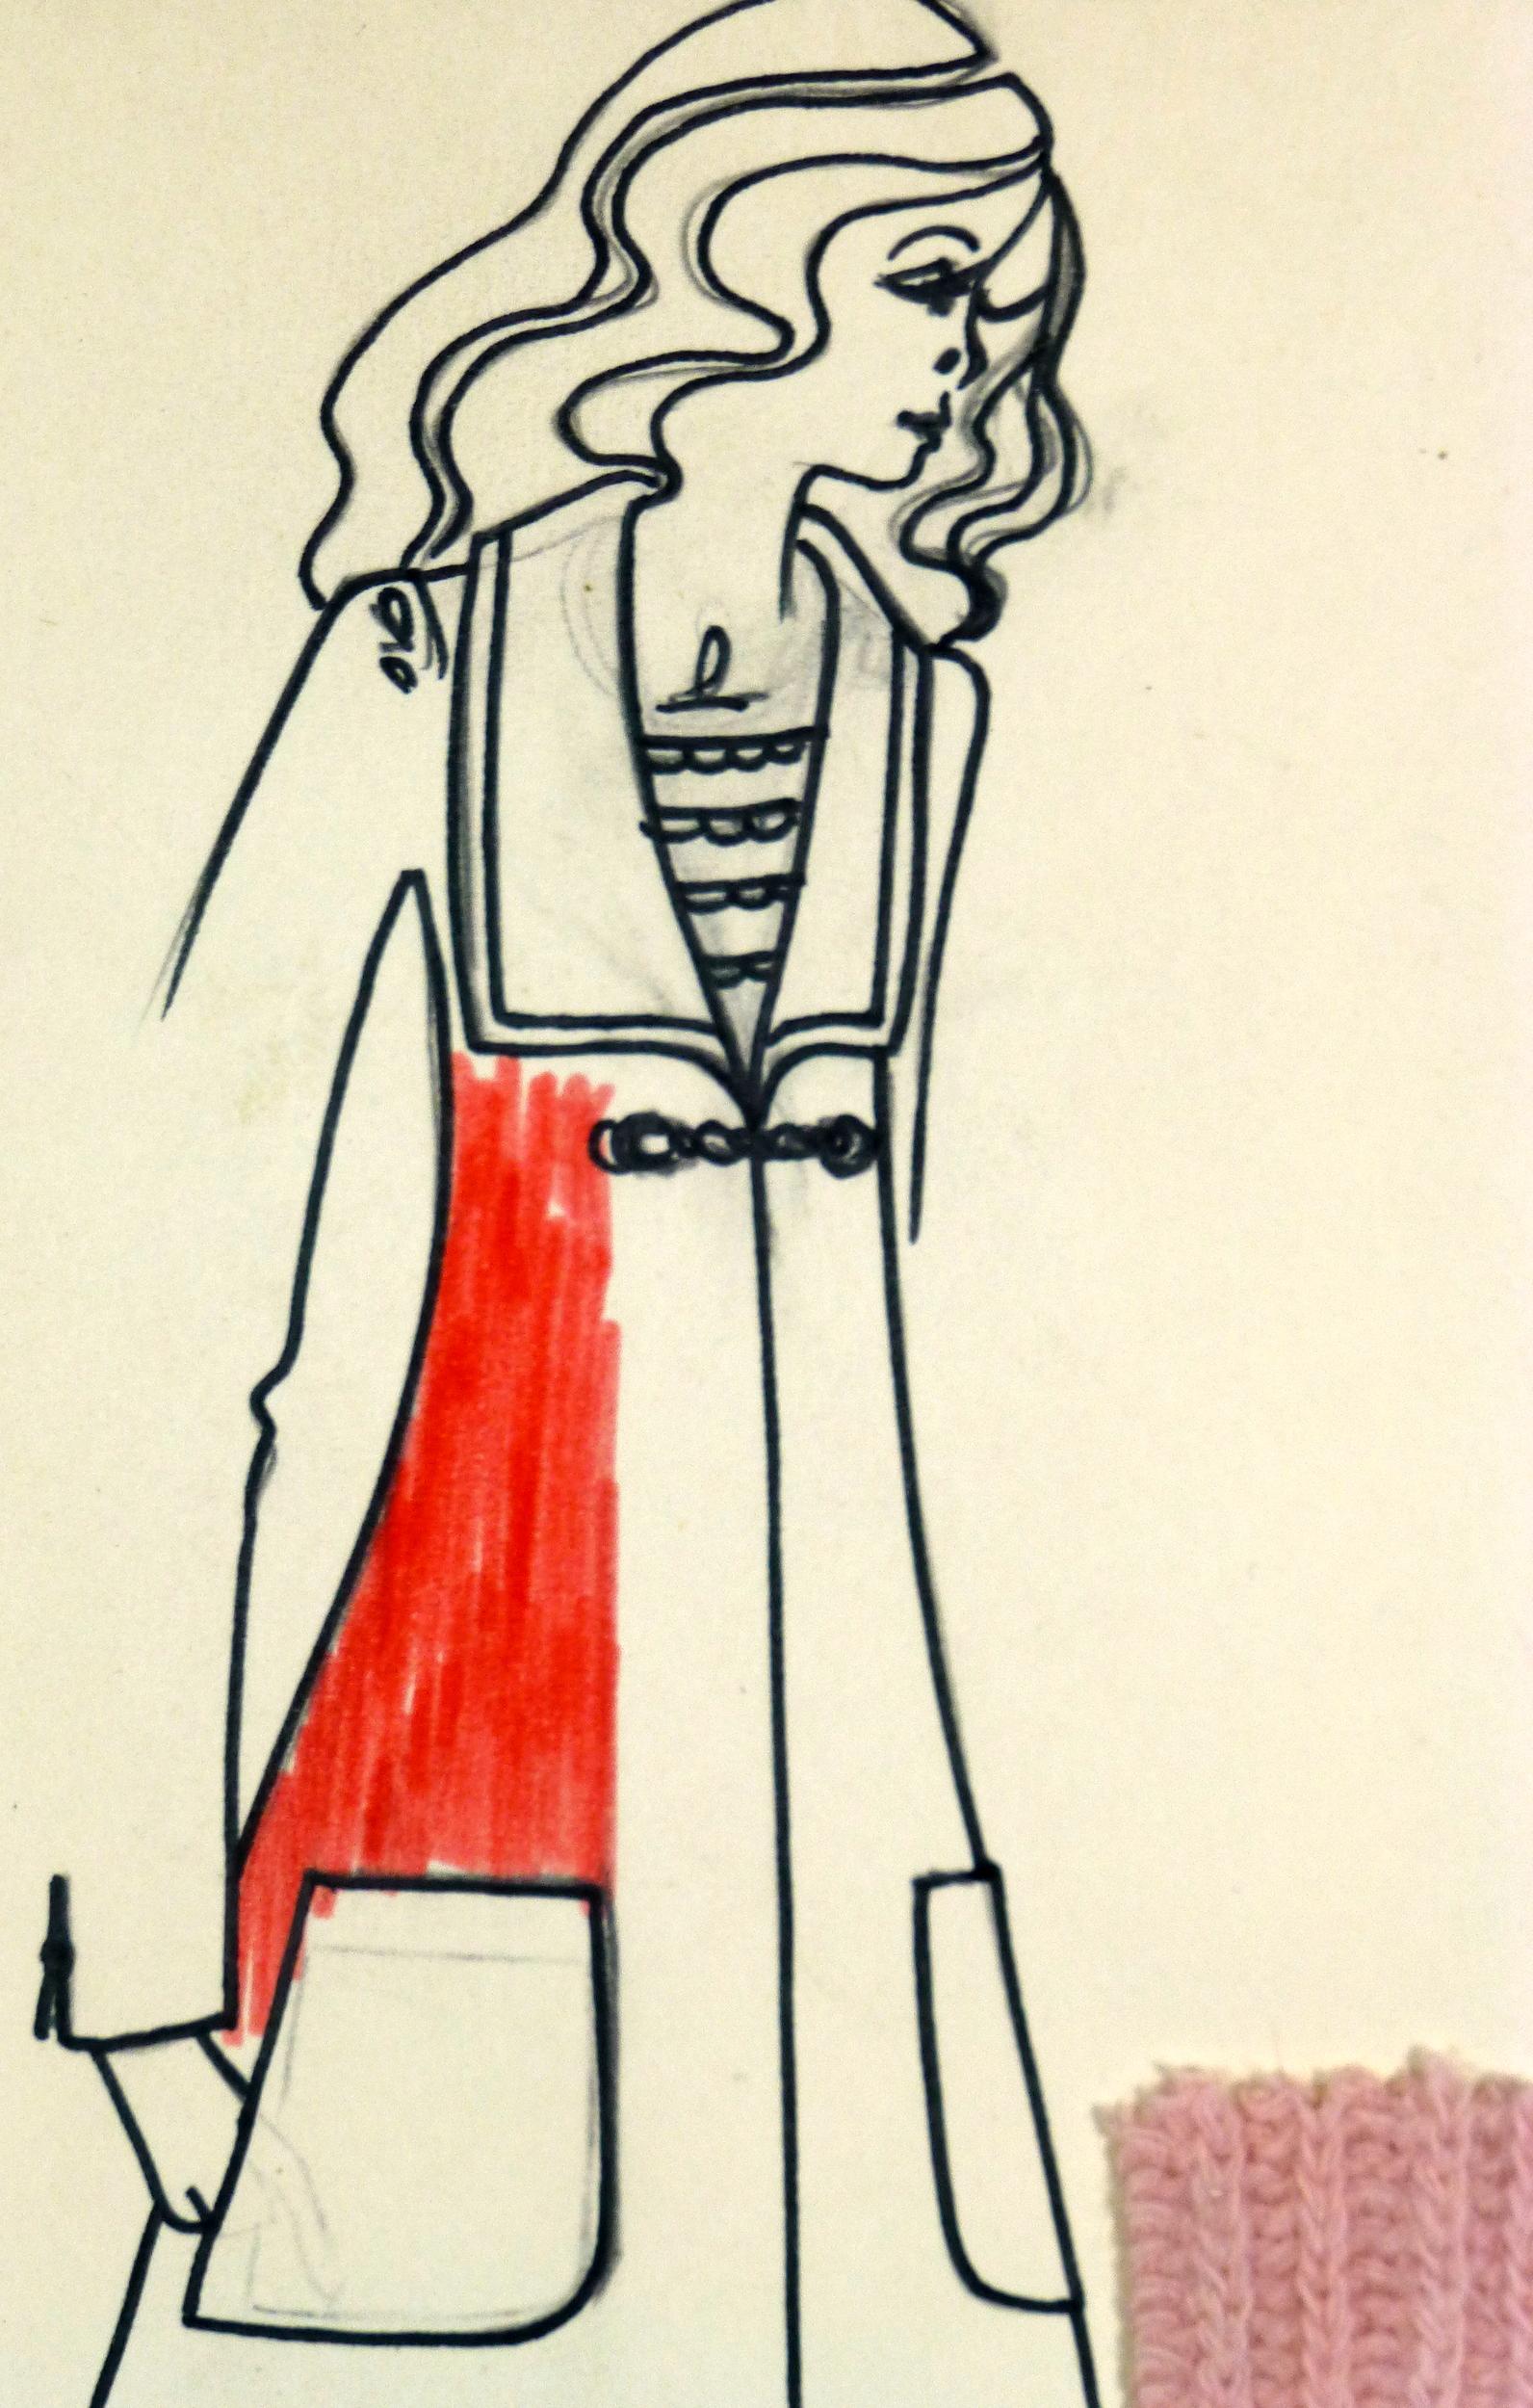 Vintage Paris Fashion Drawing - Knit Overcoat, c. 1980 - Art by Unknown